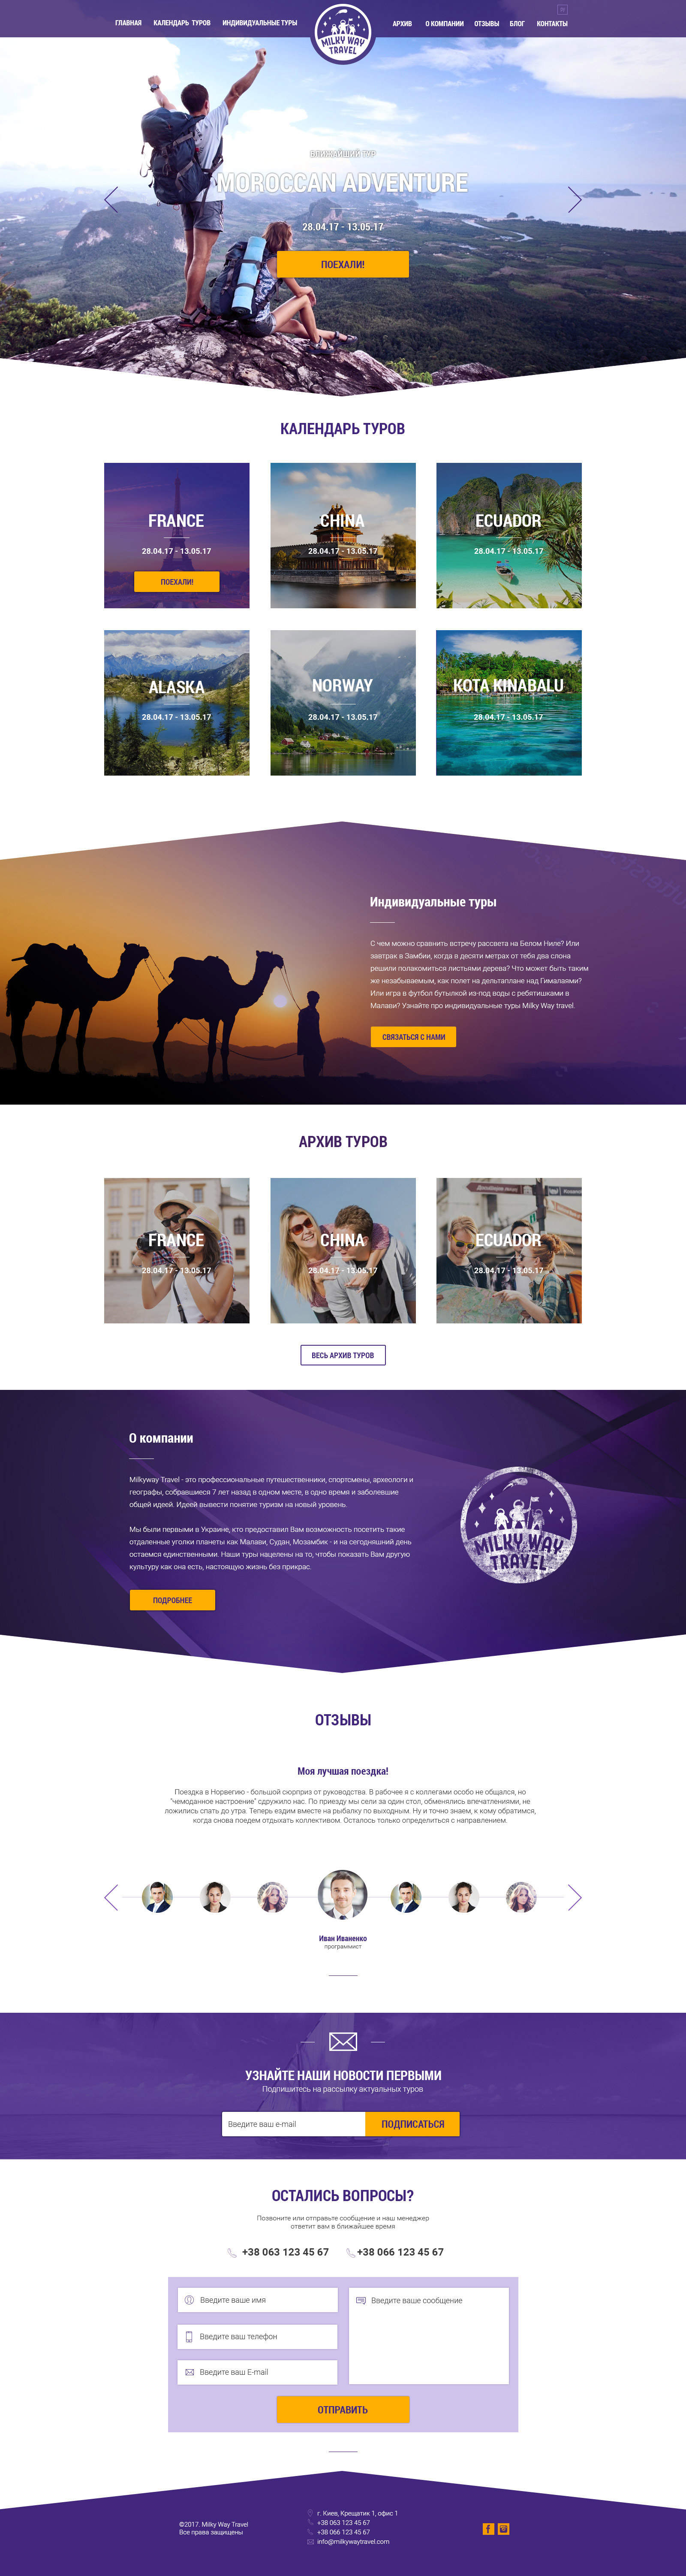 Home page design of Milky way website